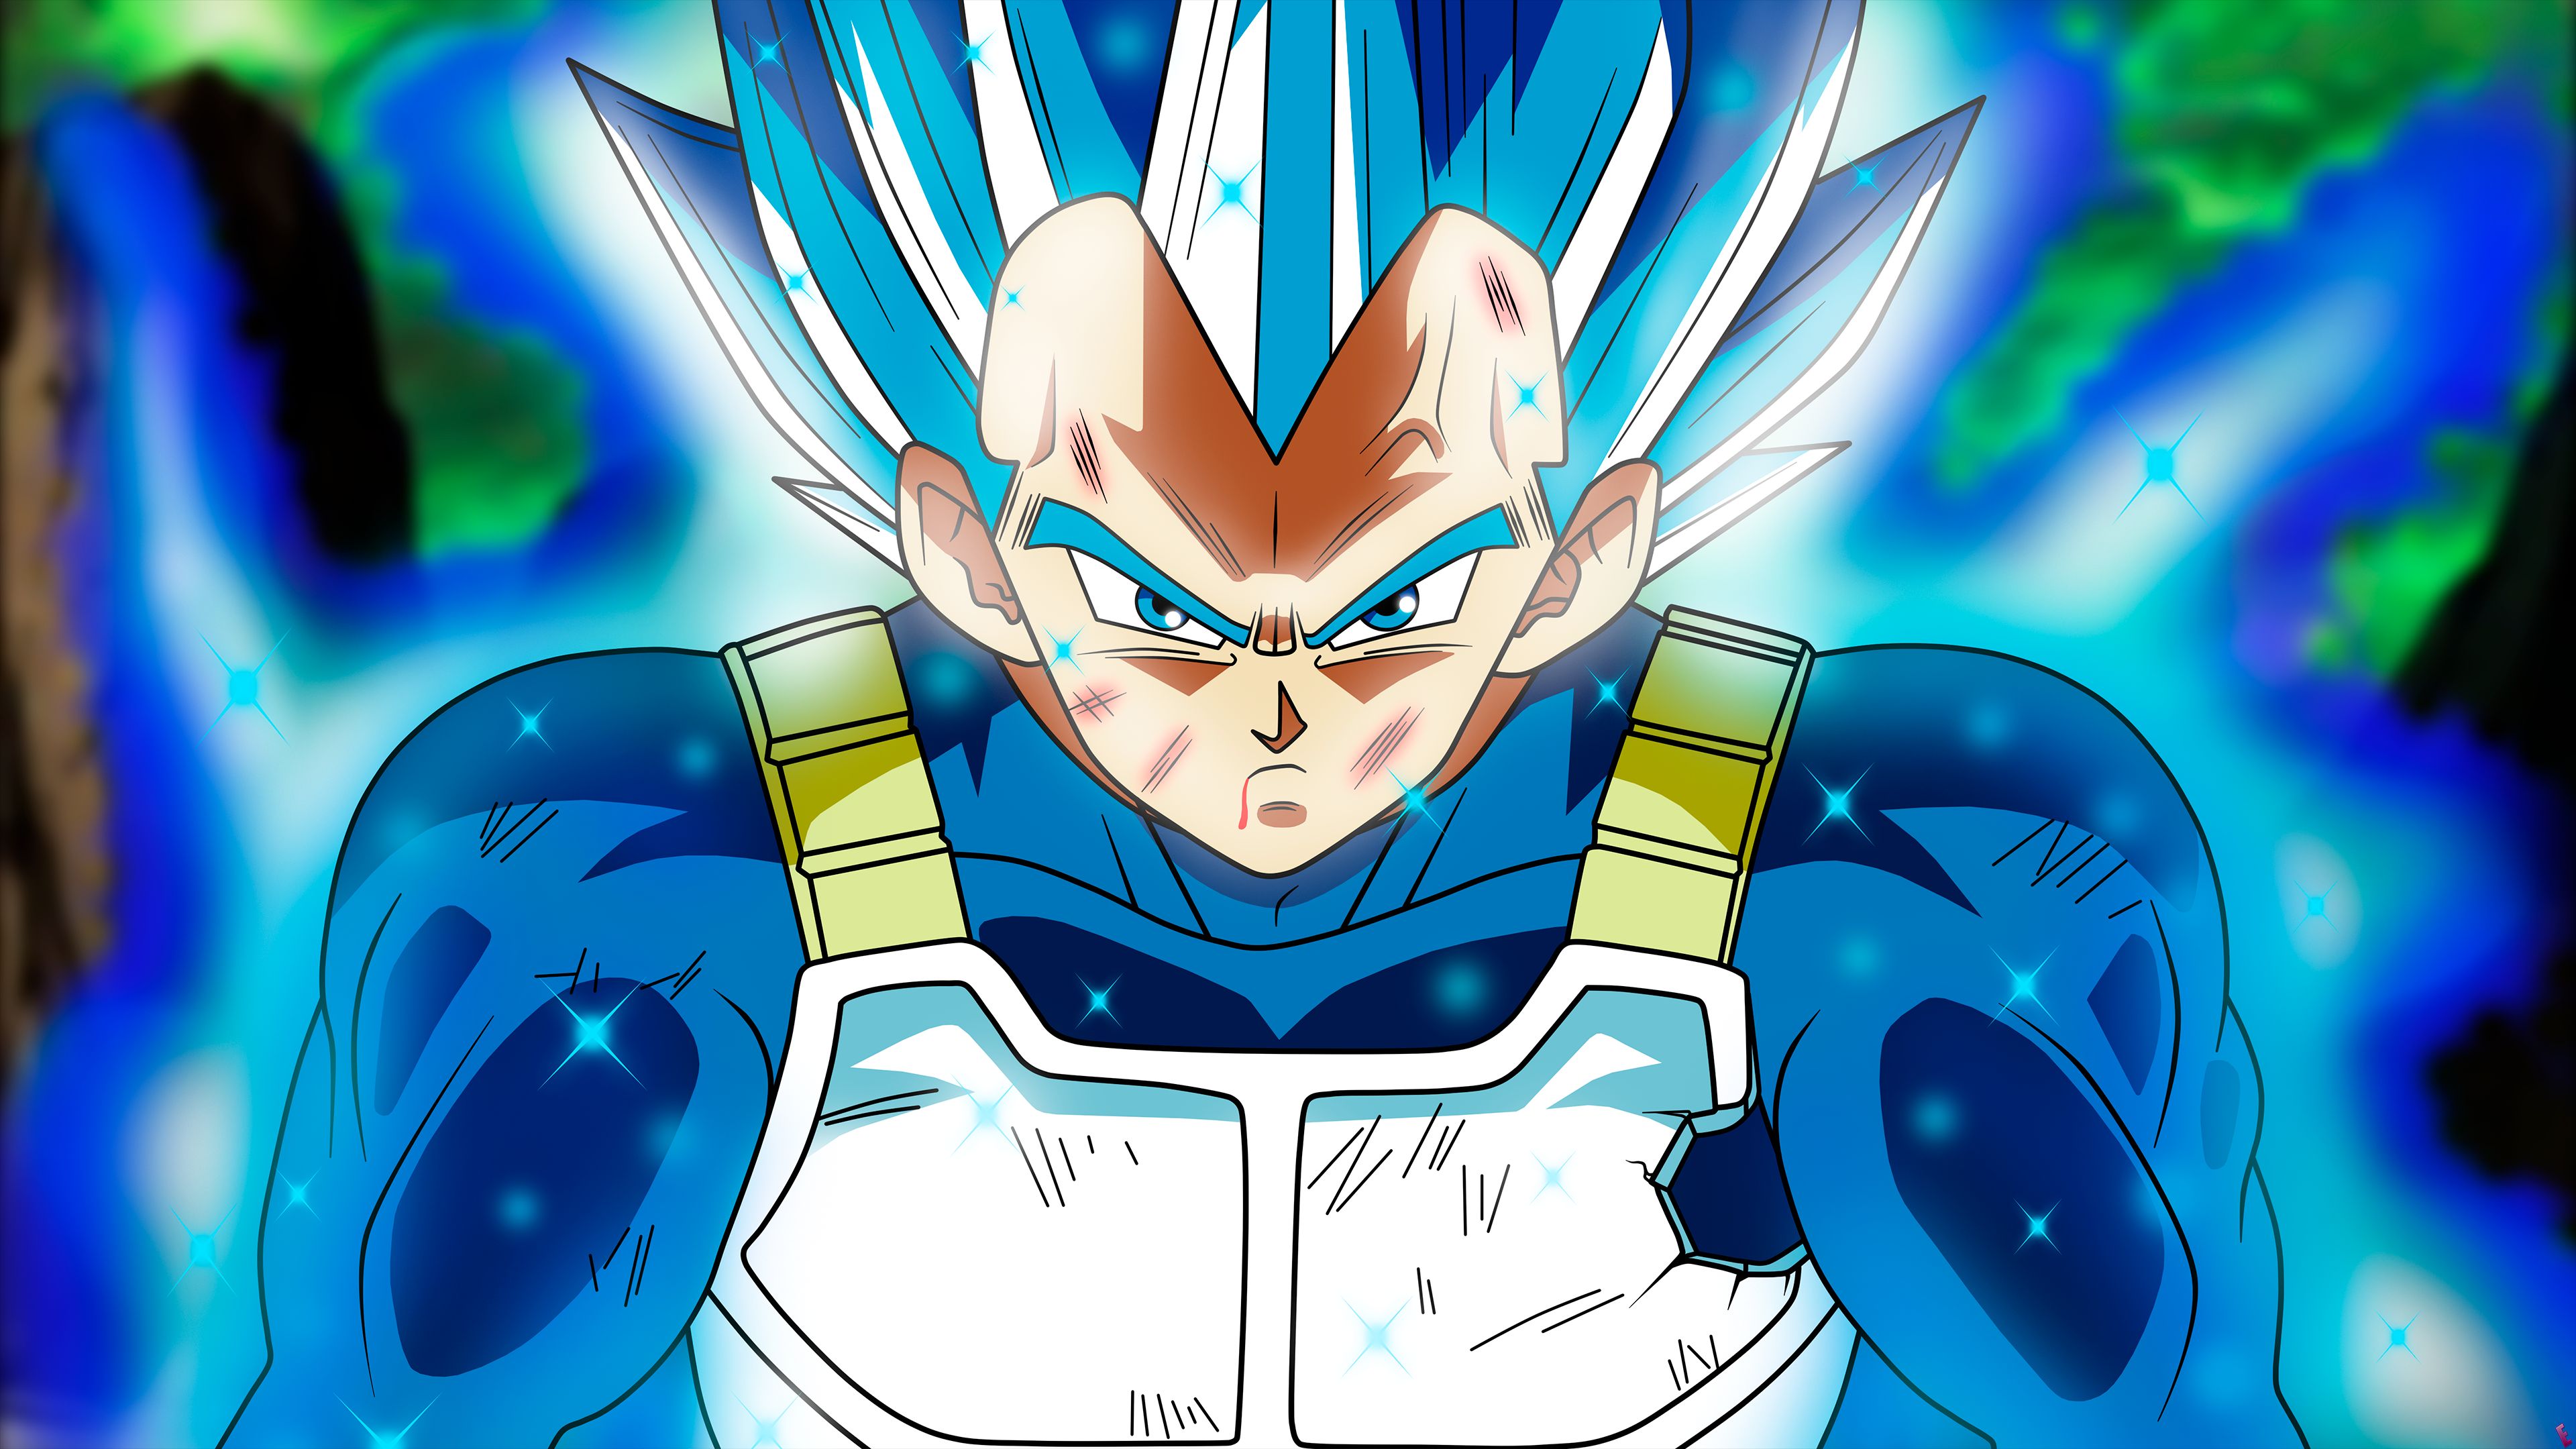 Vegeta - PC wallpaper. for better quality download here.